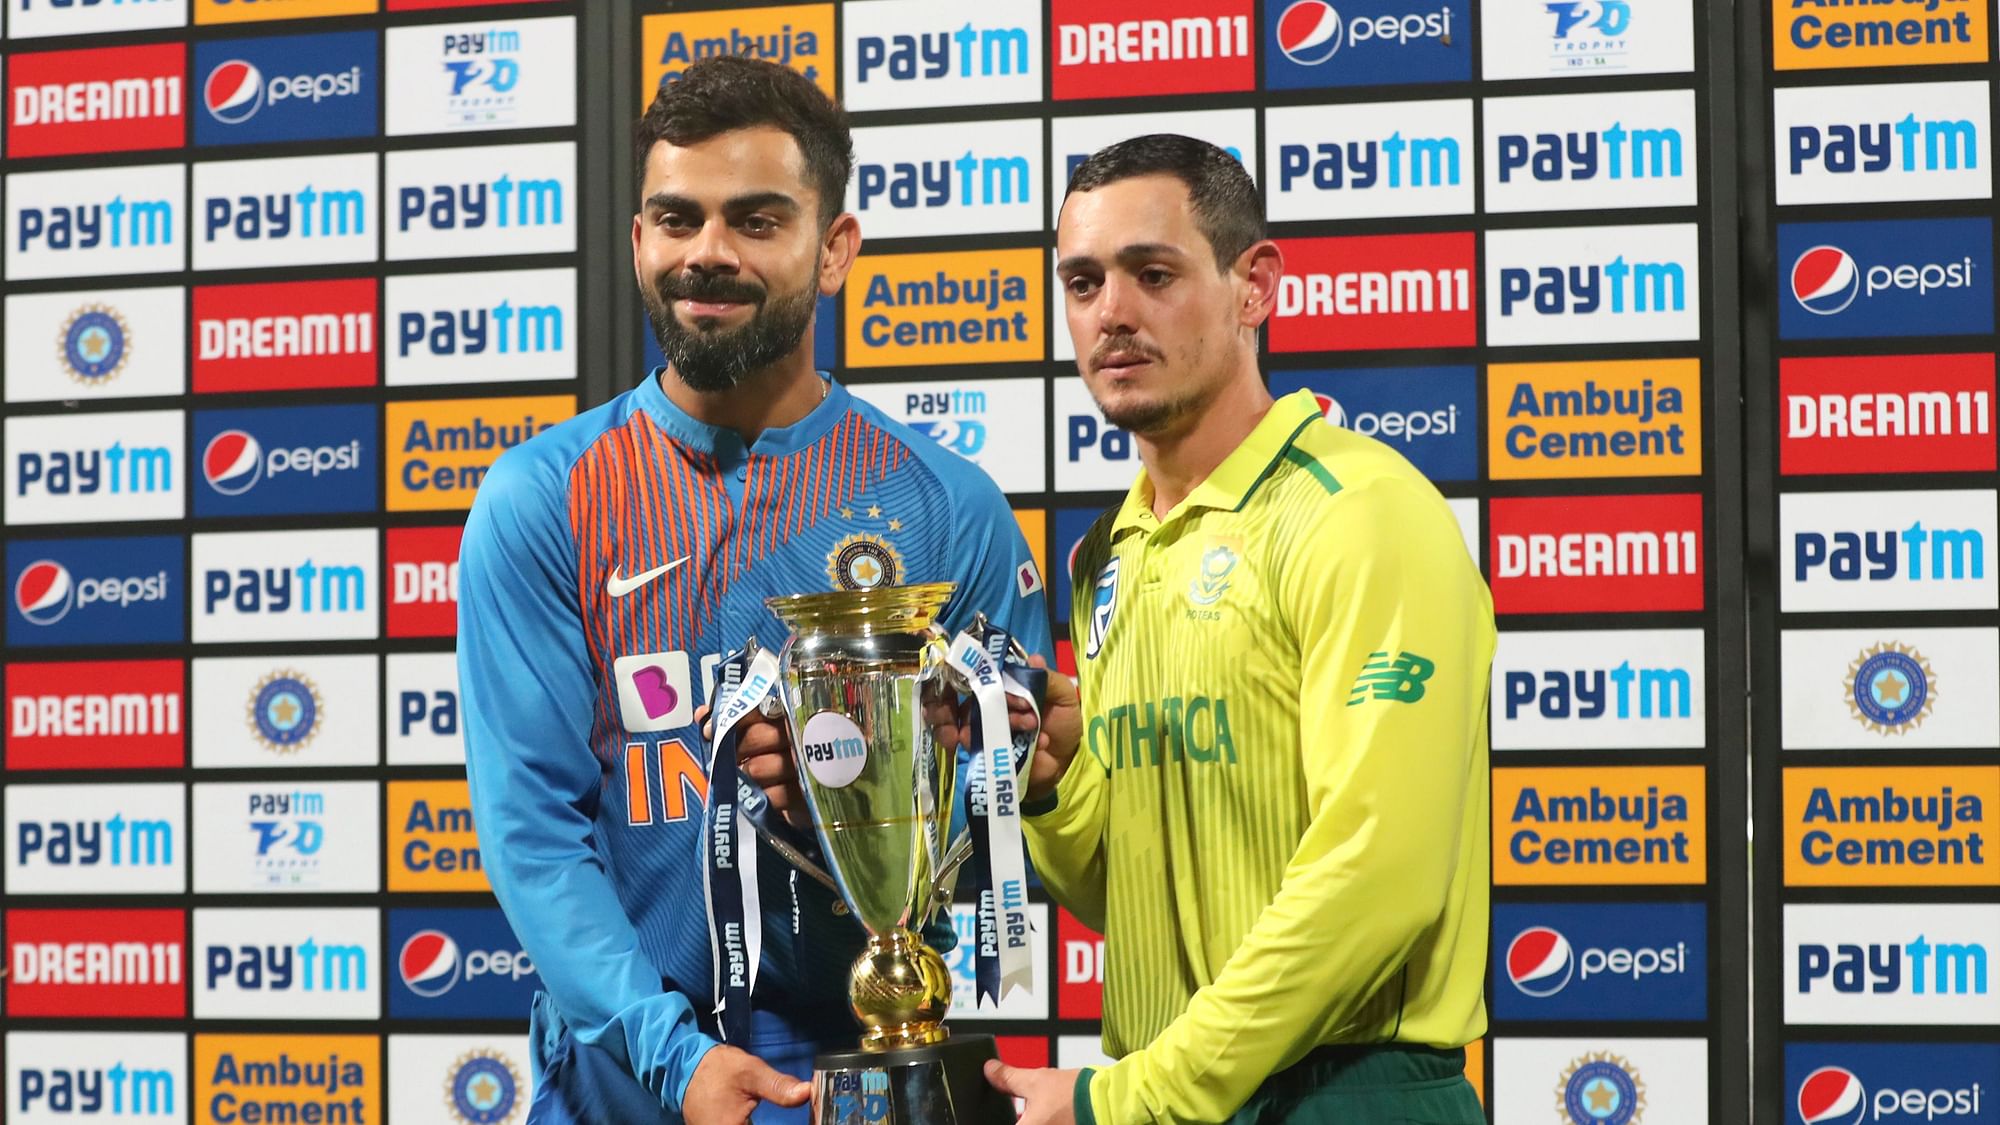 India’s captain Virat Kohli, left, and South Africa’s captain Quinton de Kock hold the winners trophy after it was presented to both of them after the third and last T20 cricket match between India and South Africa .